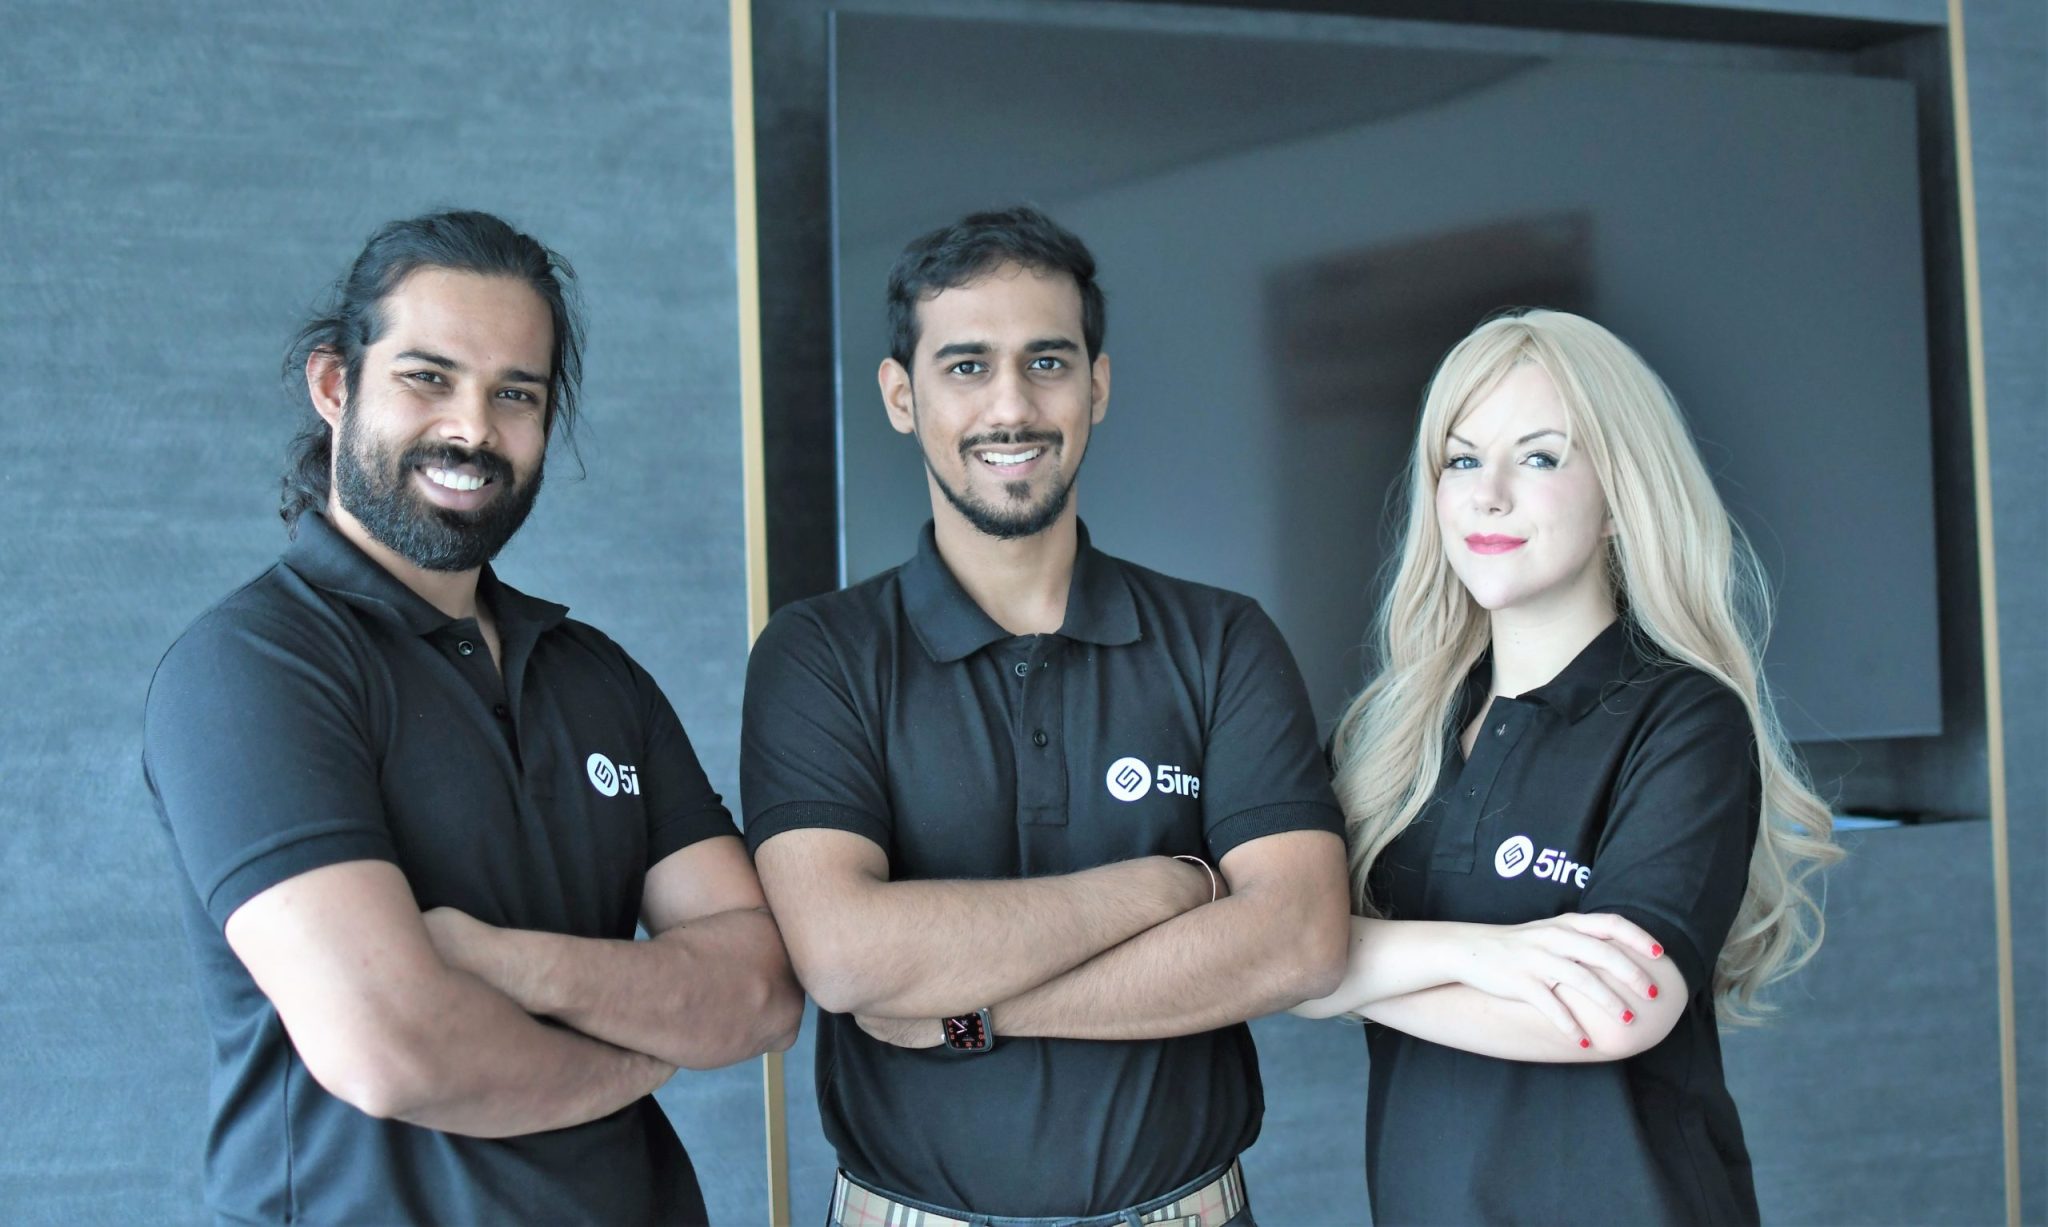 A landscape image of the 5ire team, wearing branded polo shirts.